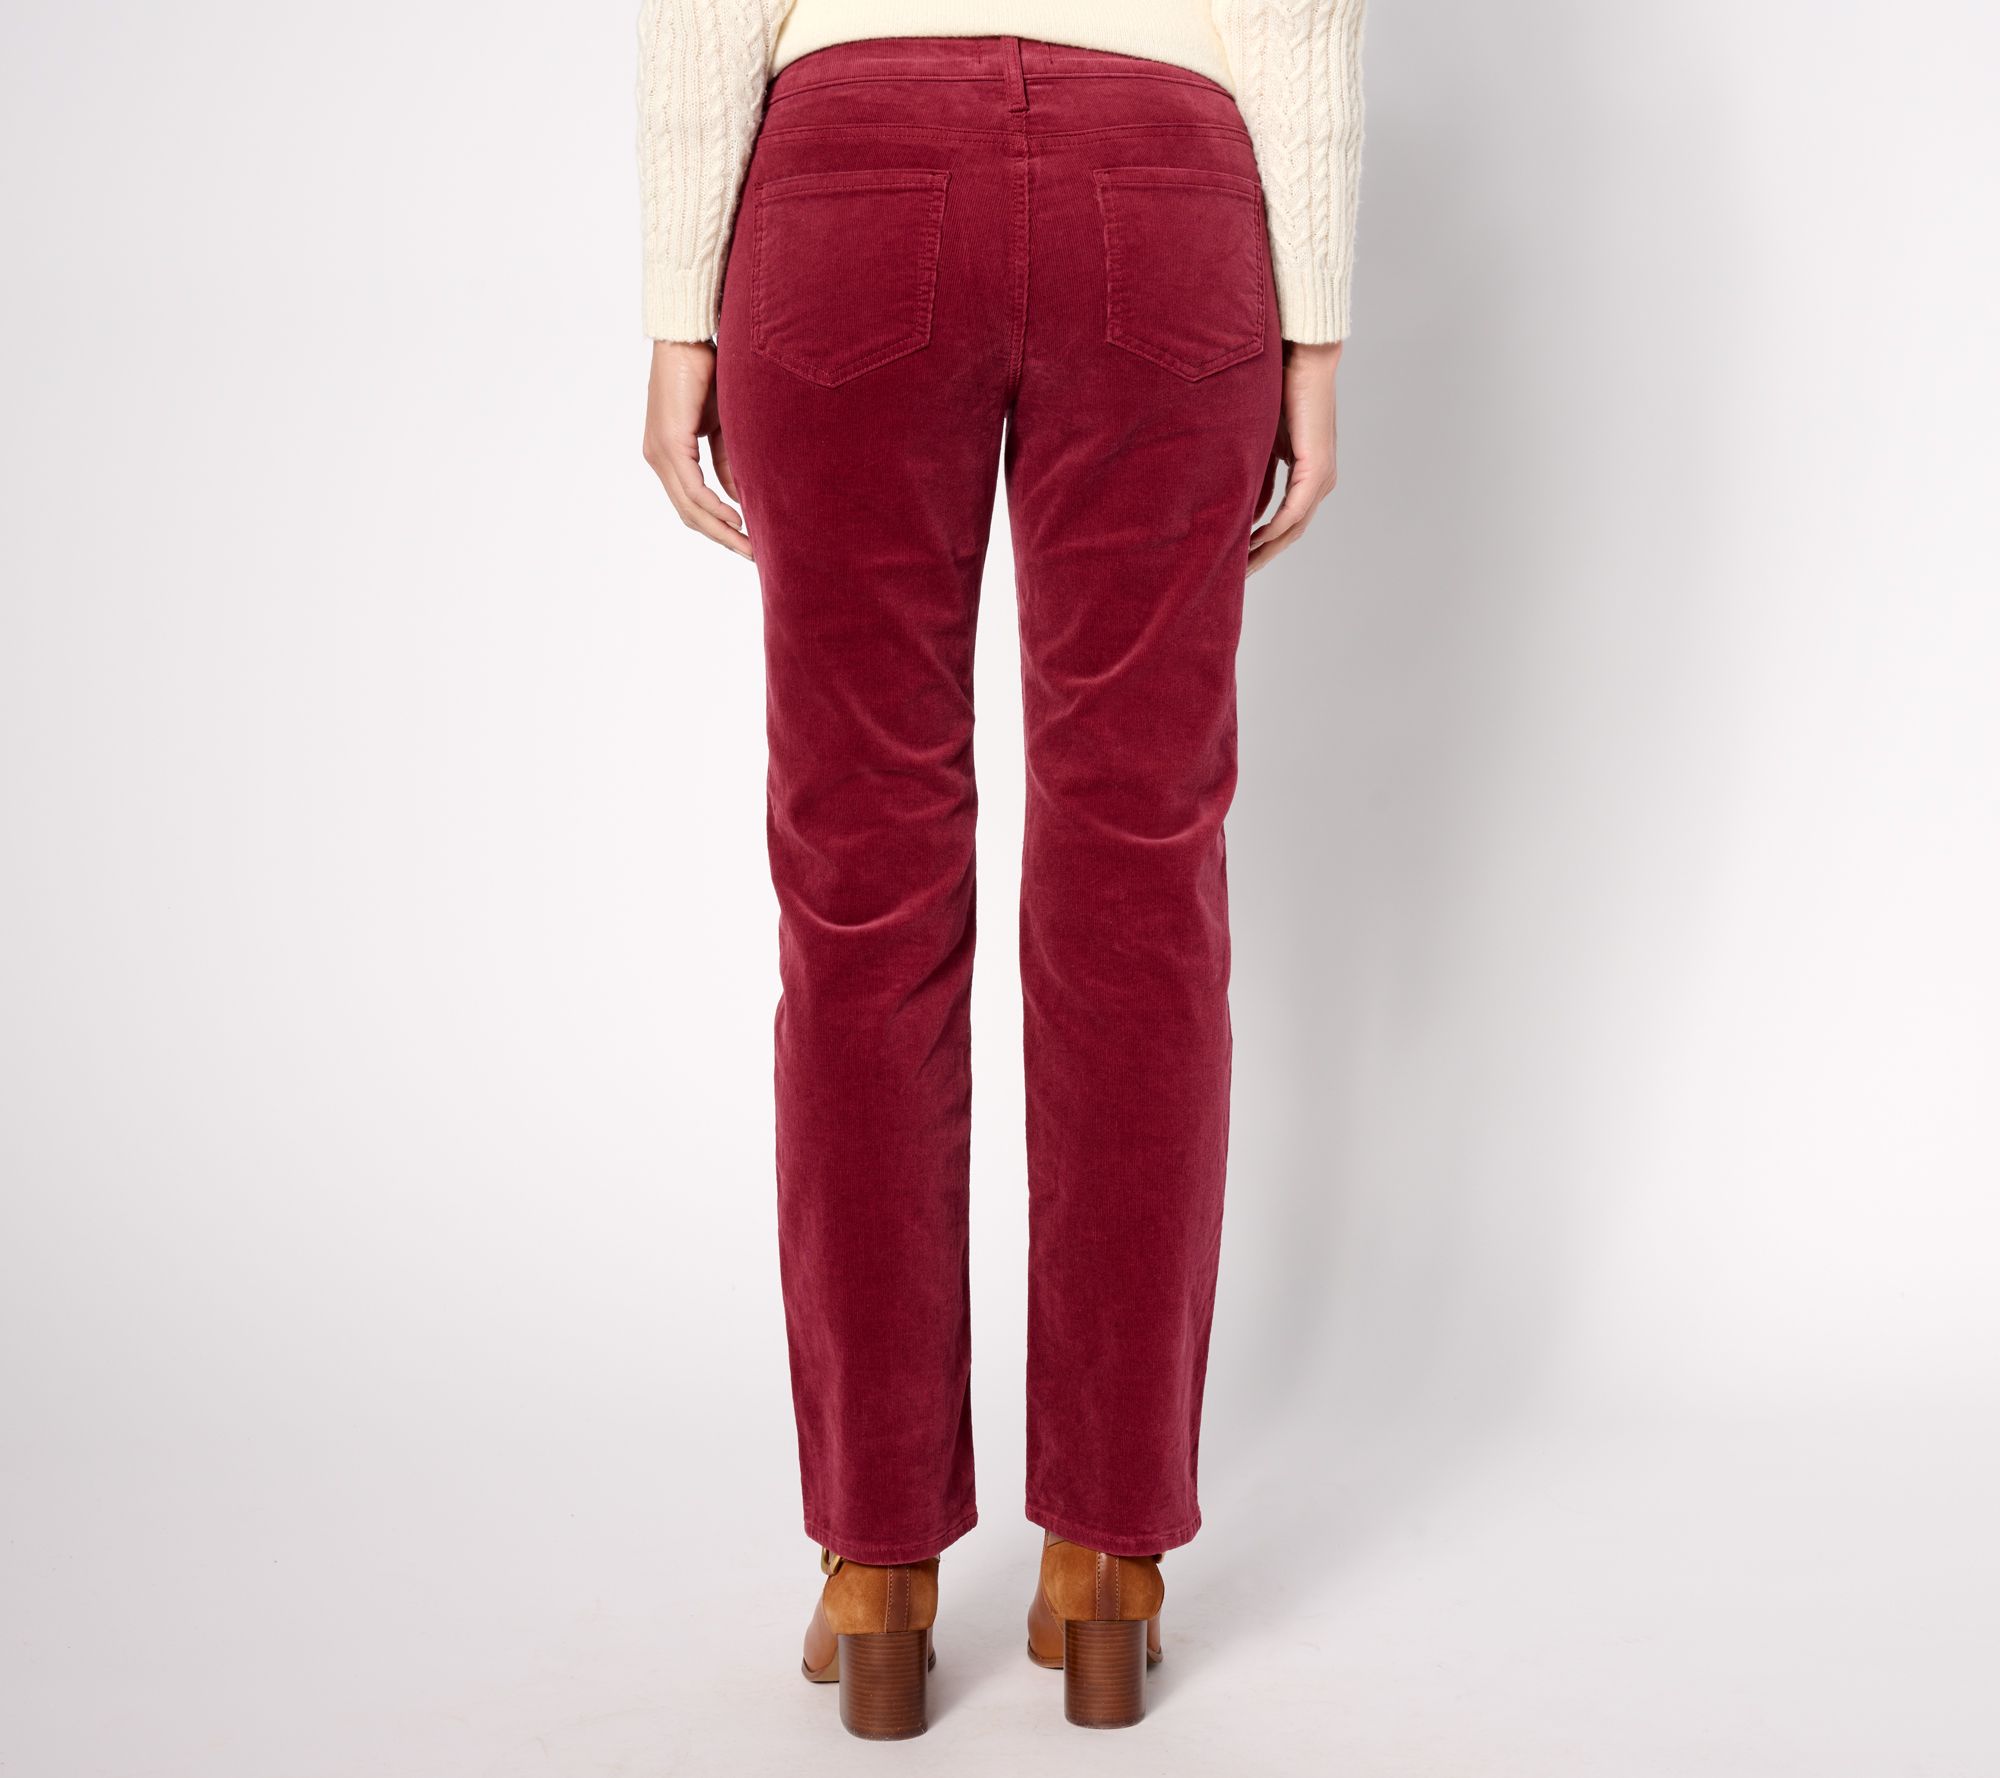 NYDJ Marilyn Straight in Wale Baby Corduroy Pants- Cranberry - QVC.com